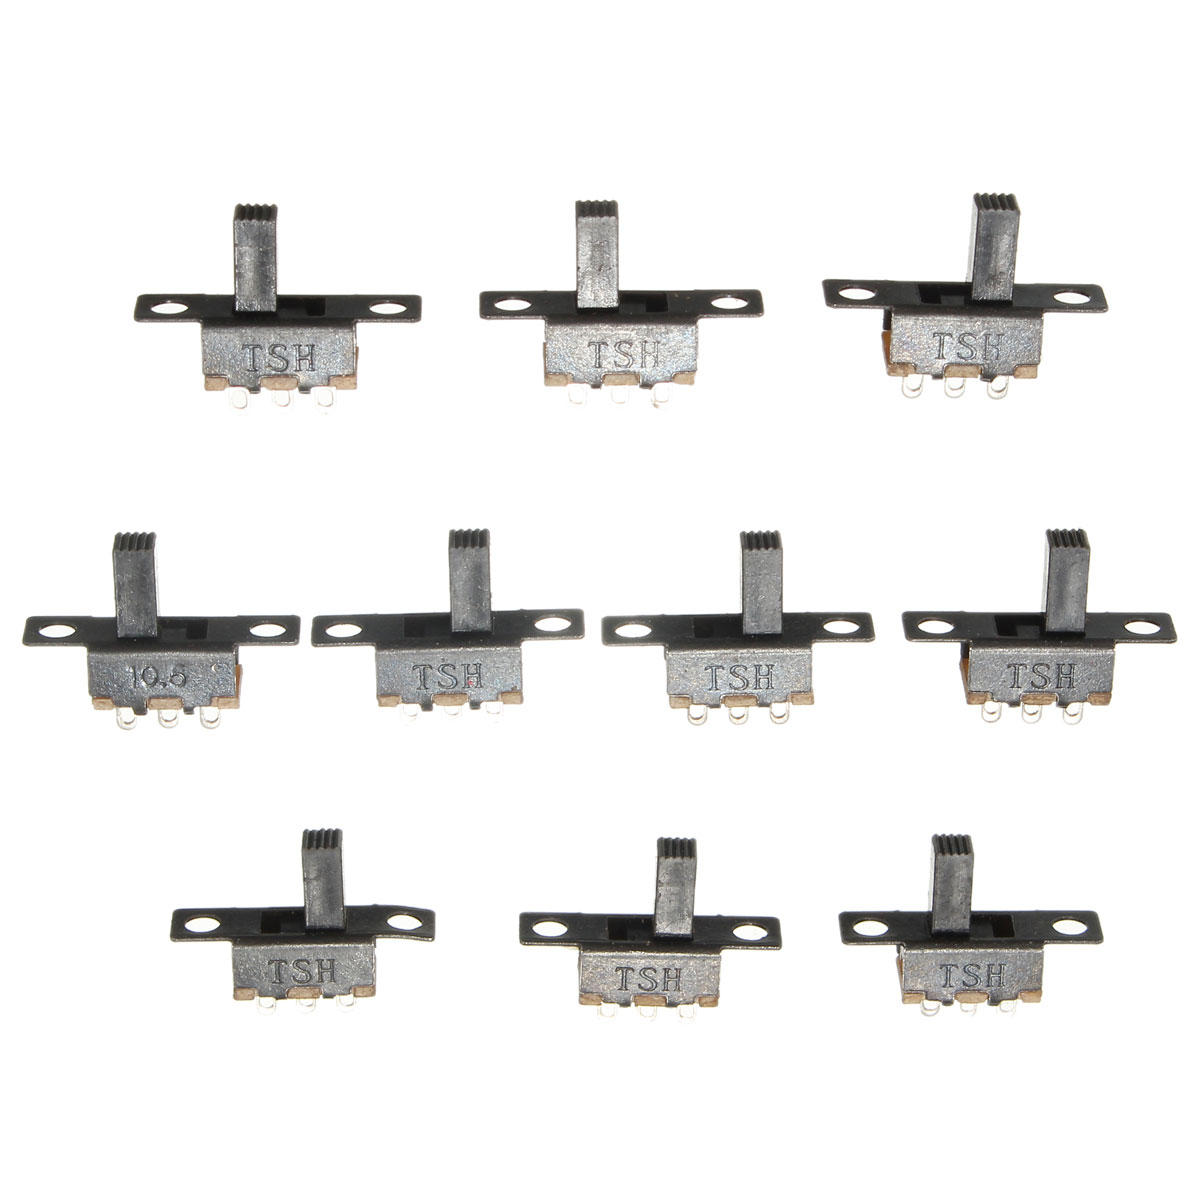 30Pcs Black Mini Size SPDT Slide Switches On-Off 100V 2A DIY Material Toggle Switch